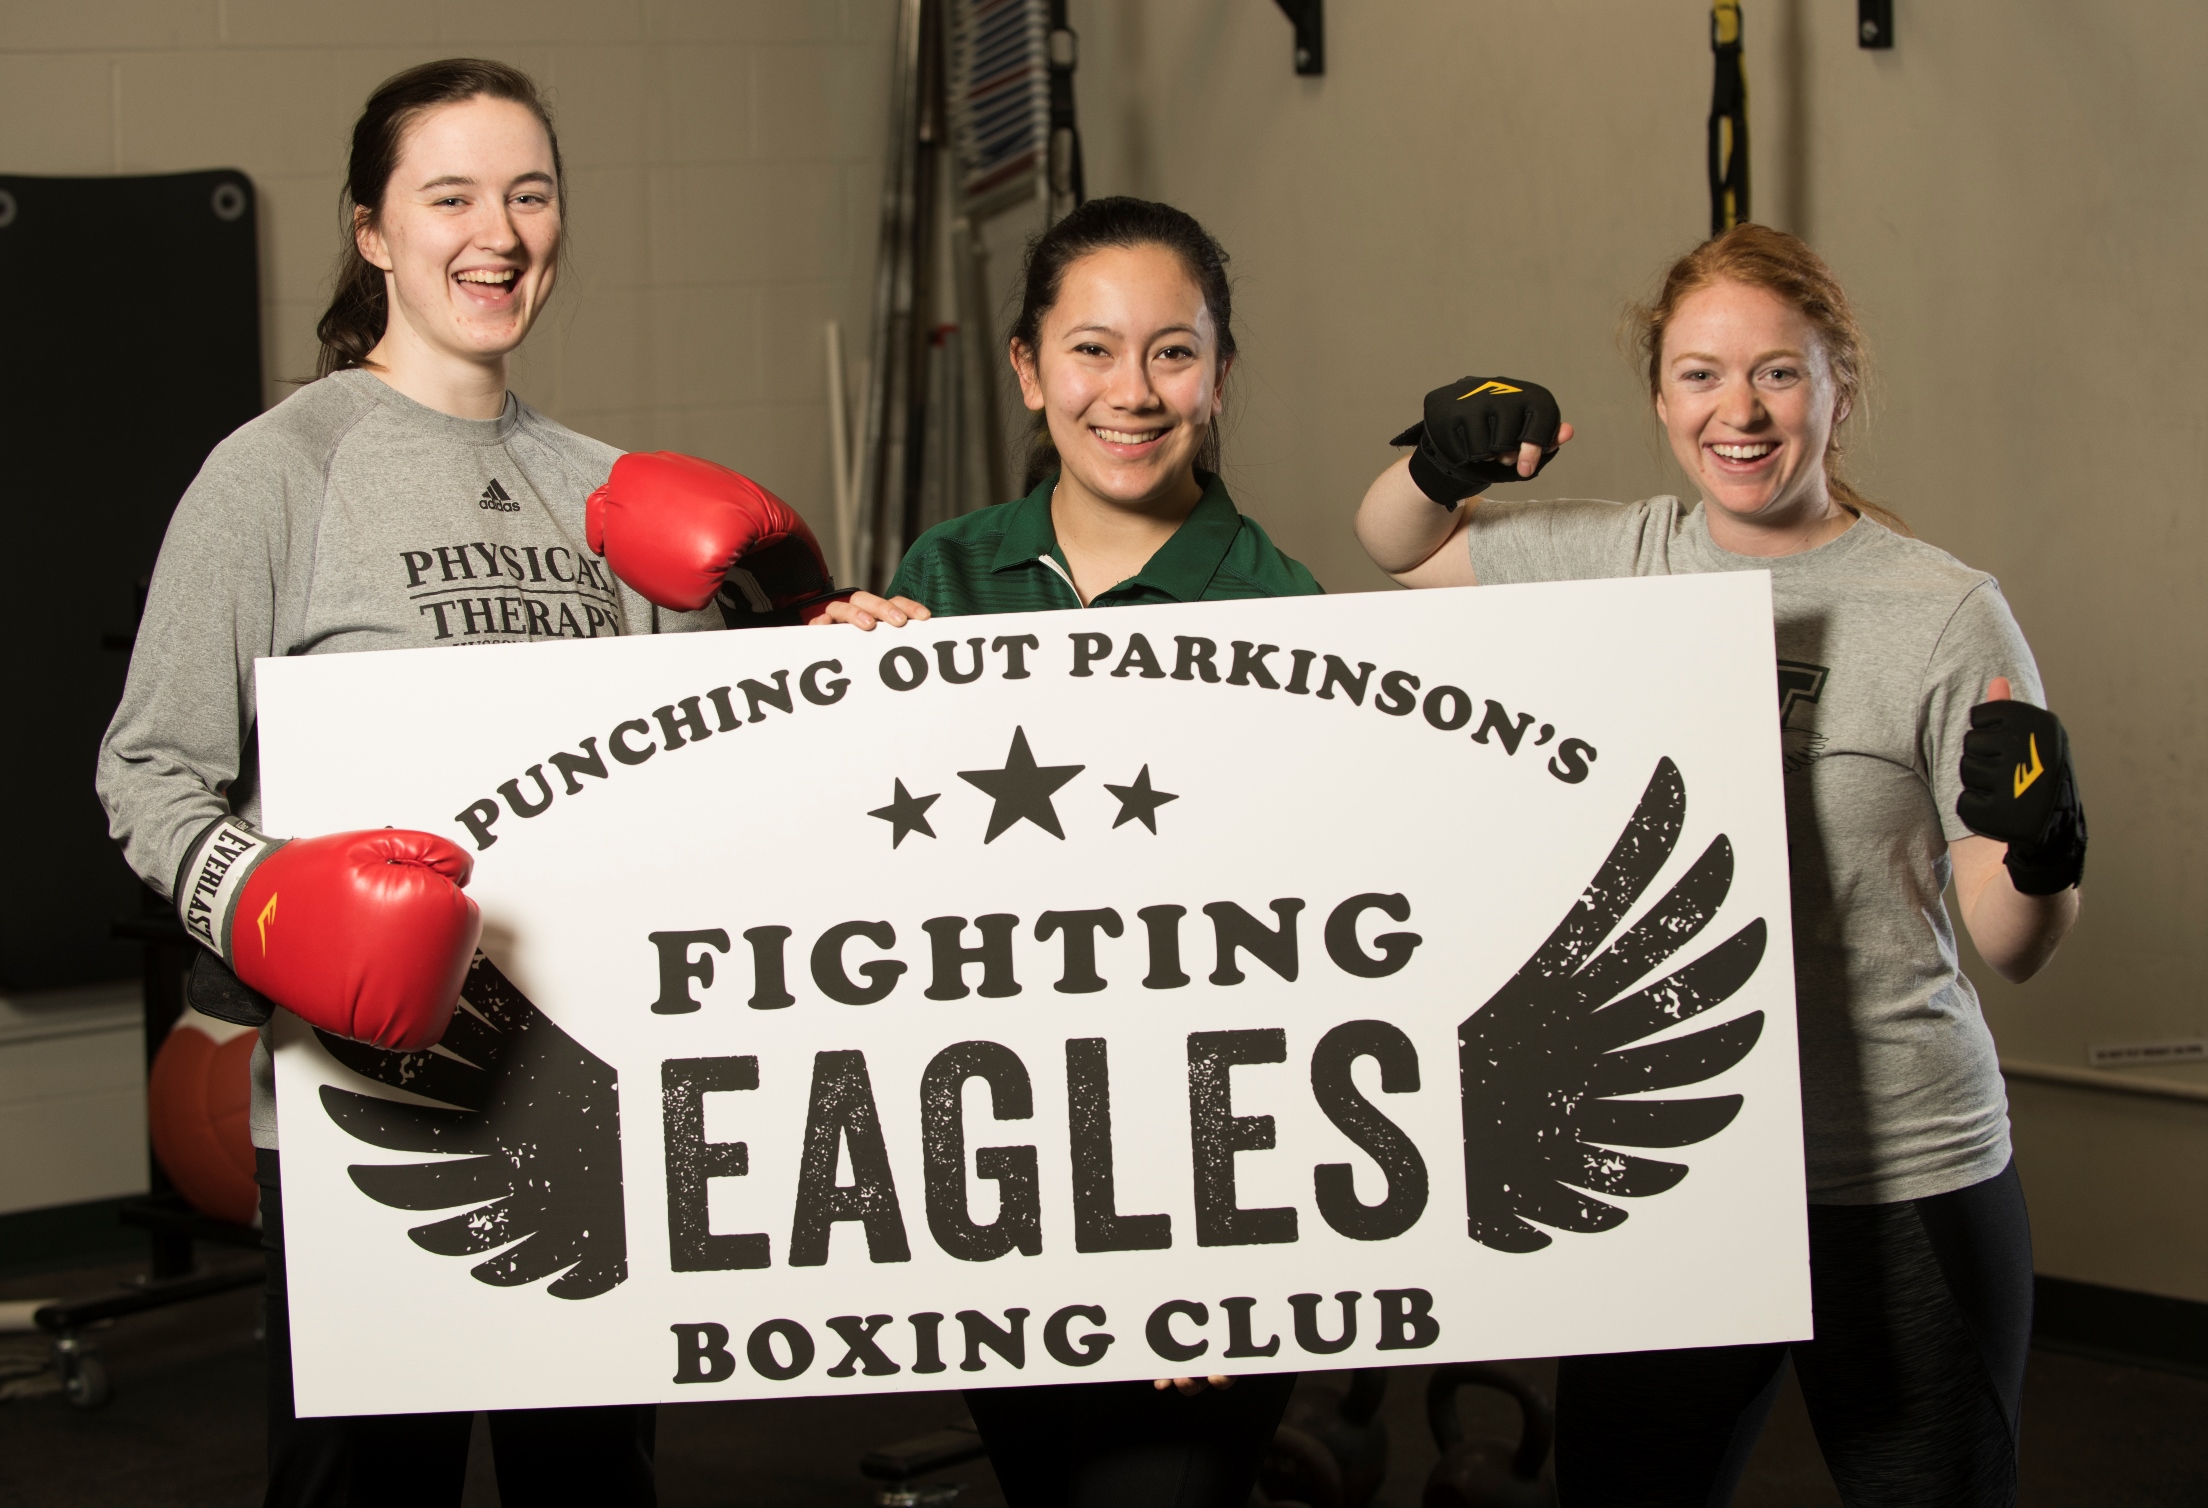 Husson University students studying occupational therapy and physical therapy are starting the Fighting Eagles Boxing Club to “punch out Parkinson’s disease.”